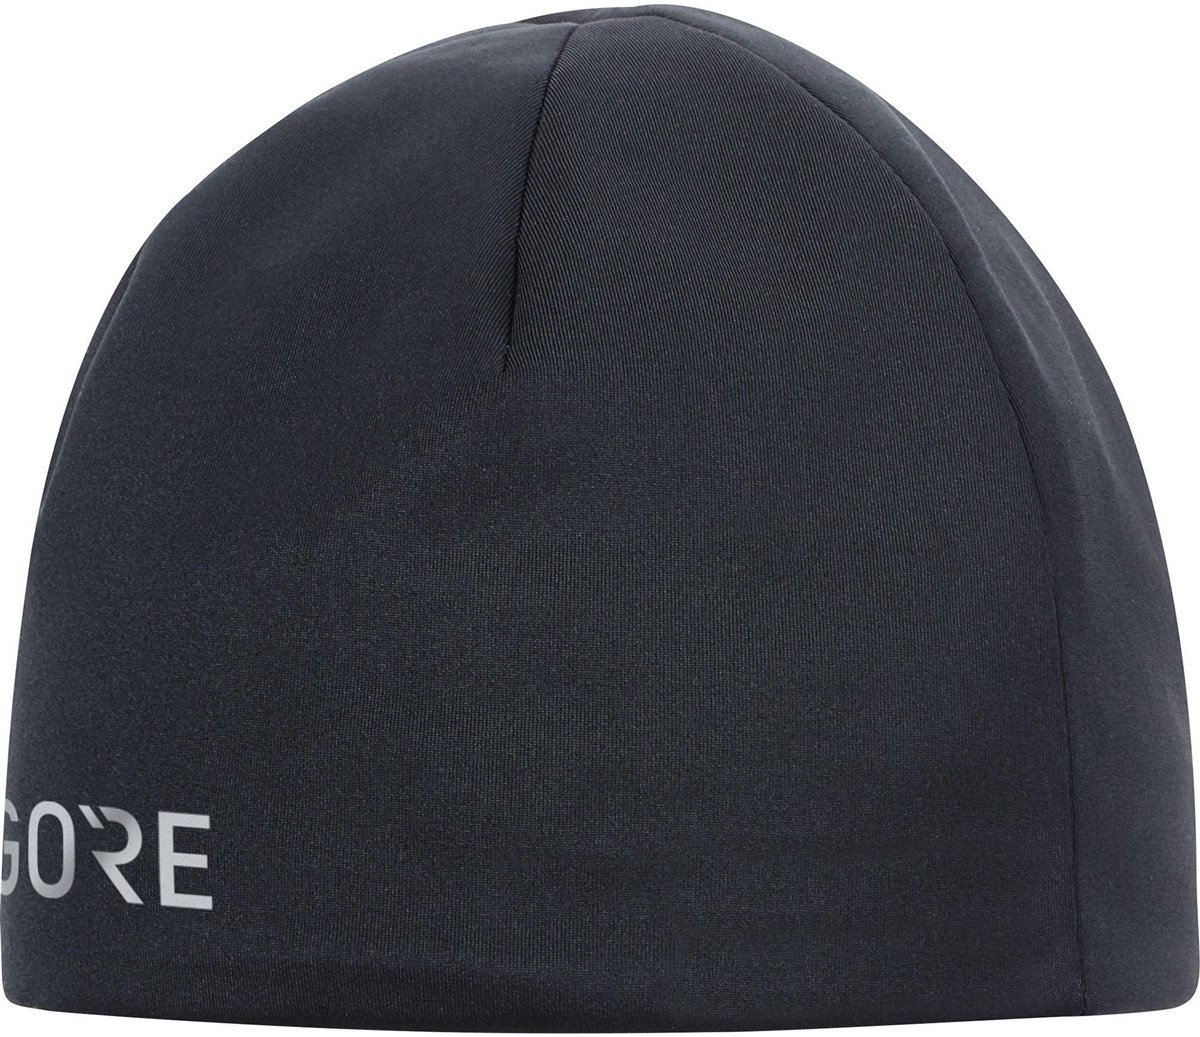 Gore M Windstopper Insulated Beanie product image